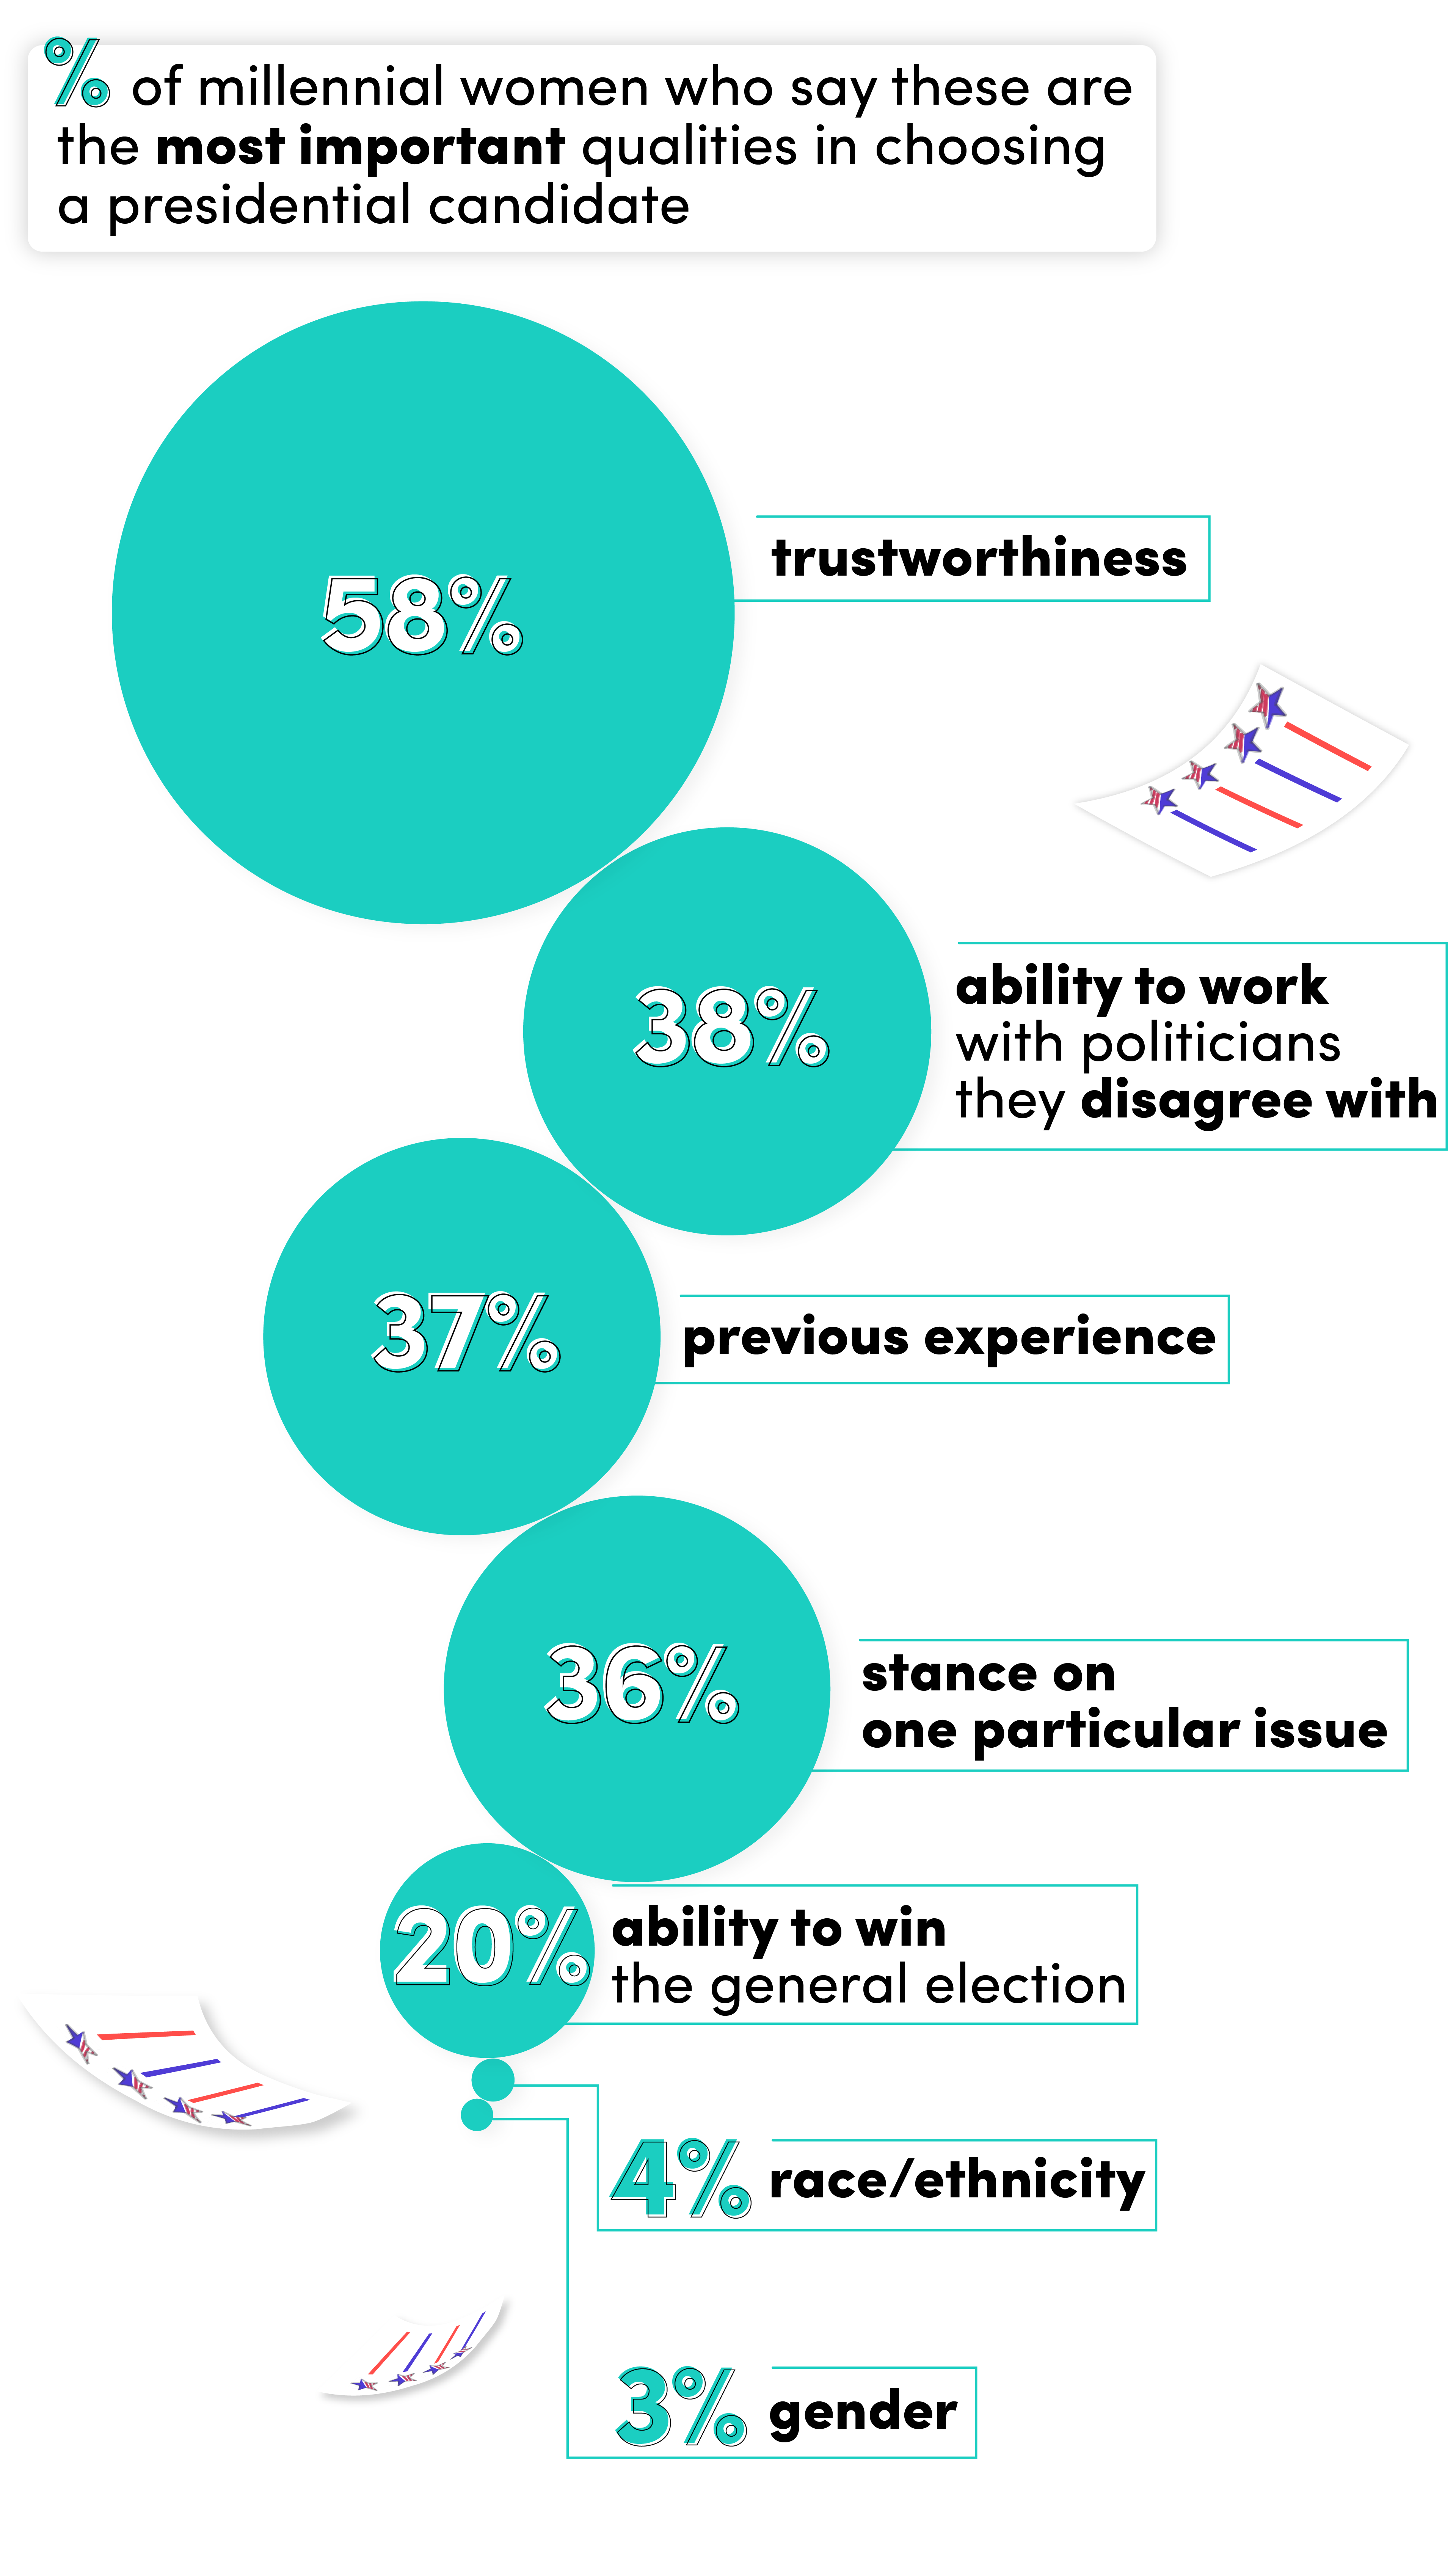 Percentage of millennial women who say these are the most important qualities in choosing a presidential candidate